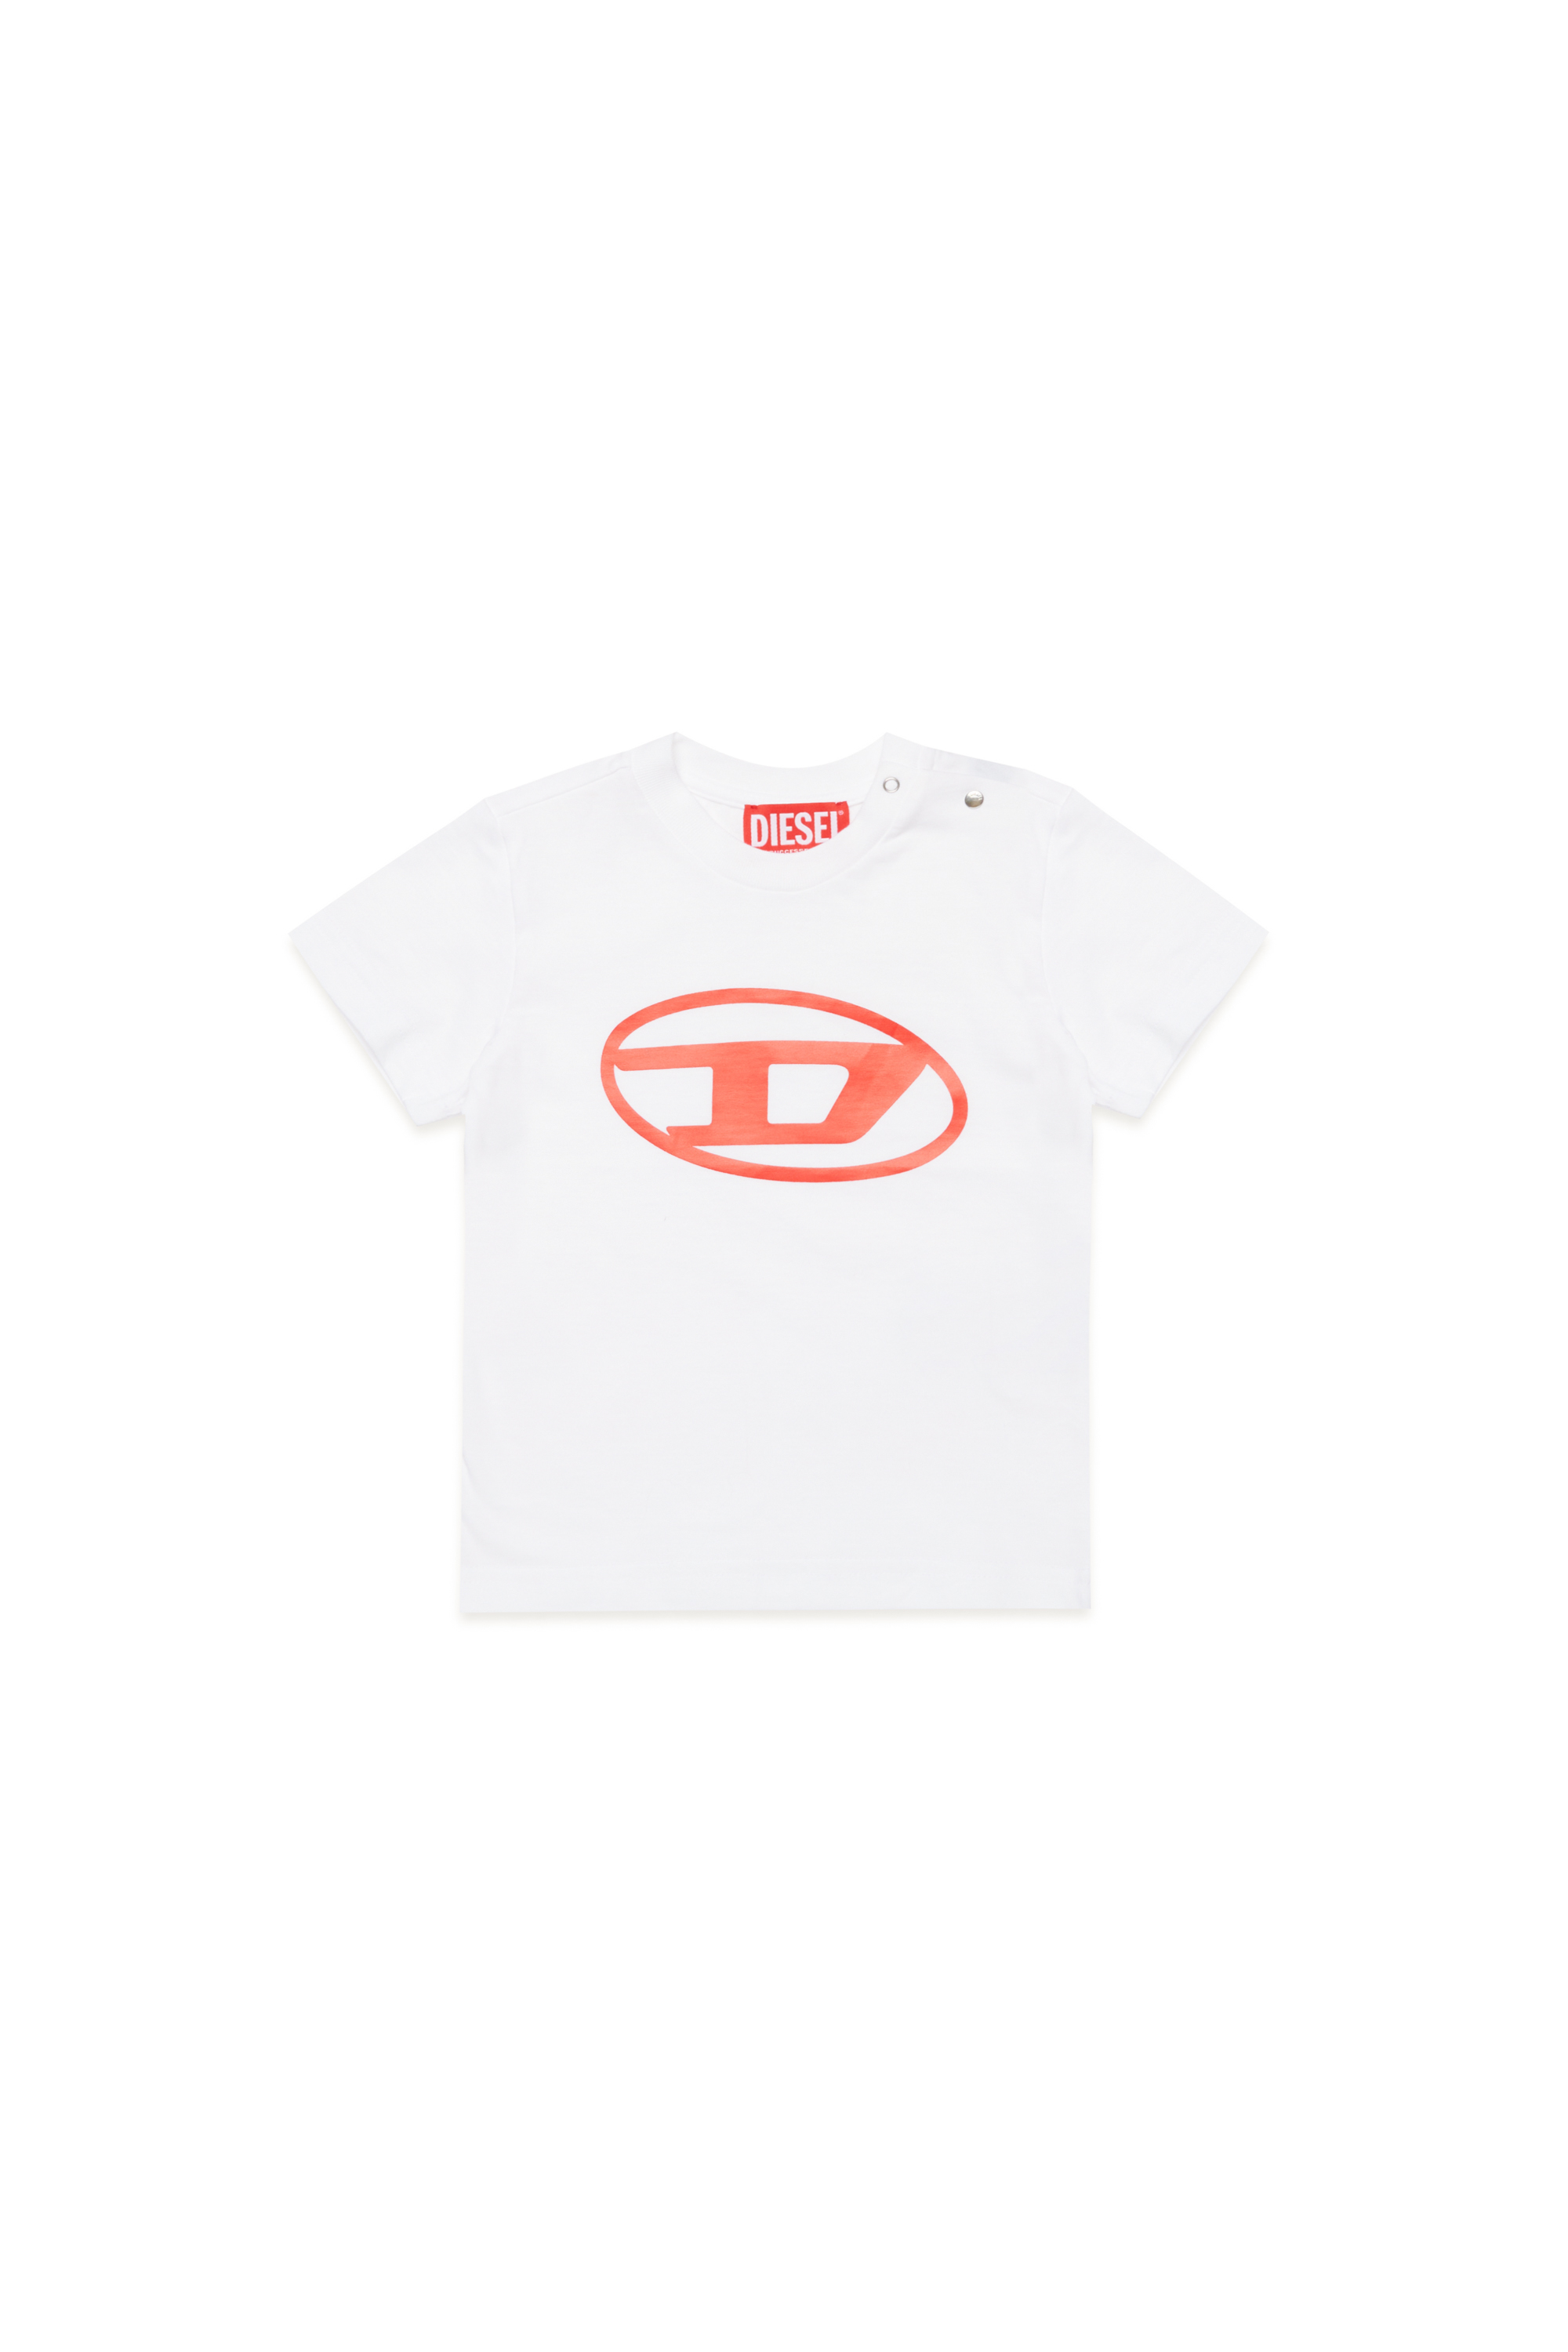 Diesel - T-shirt with Oval D logo - T-shirts and Tops - Unisex - White